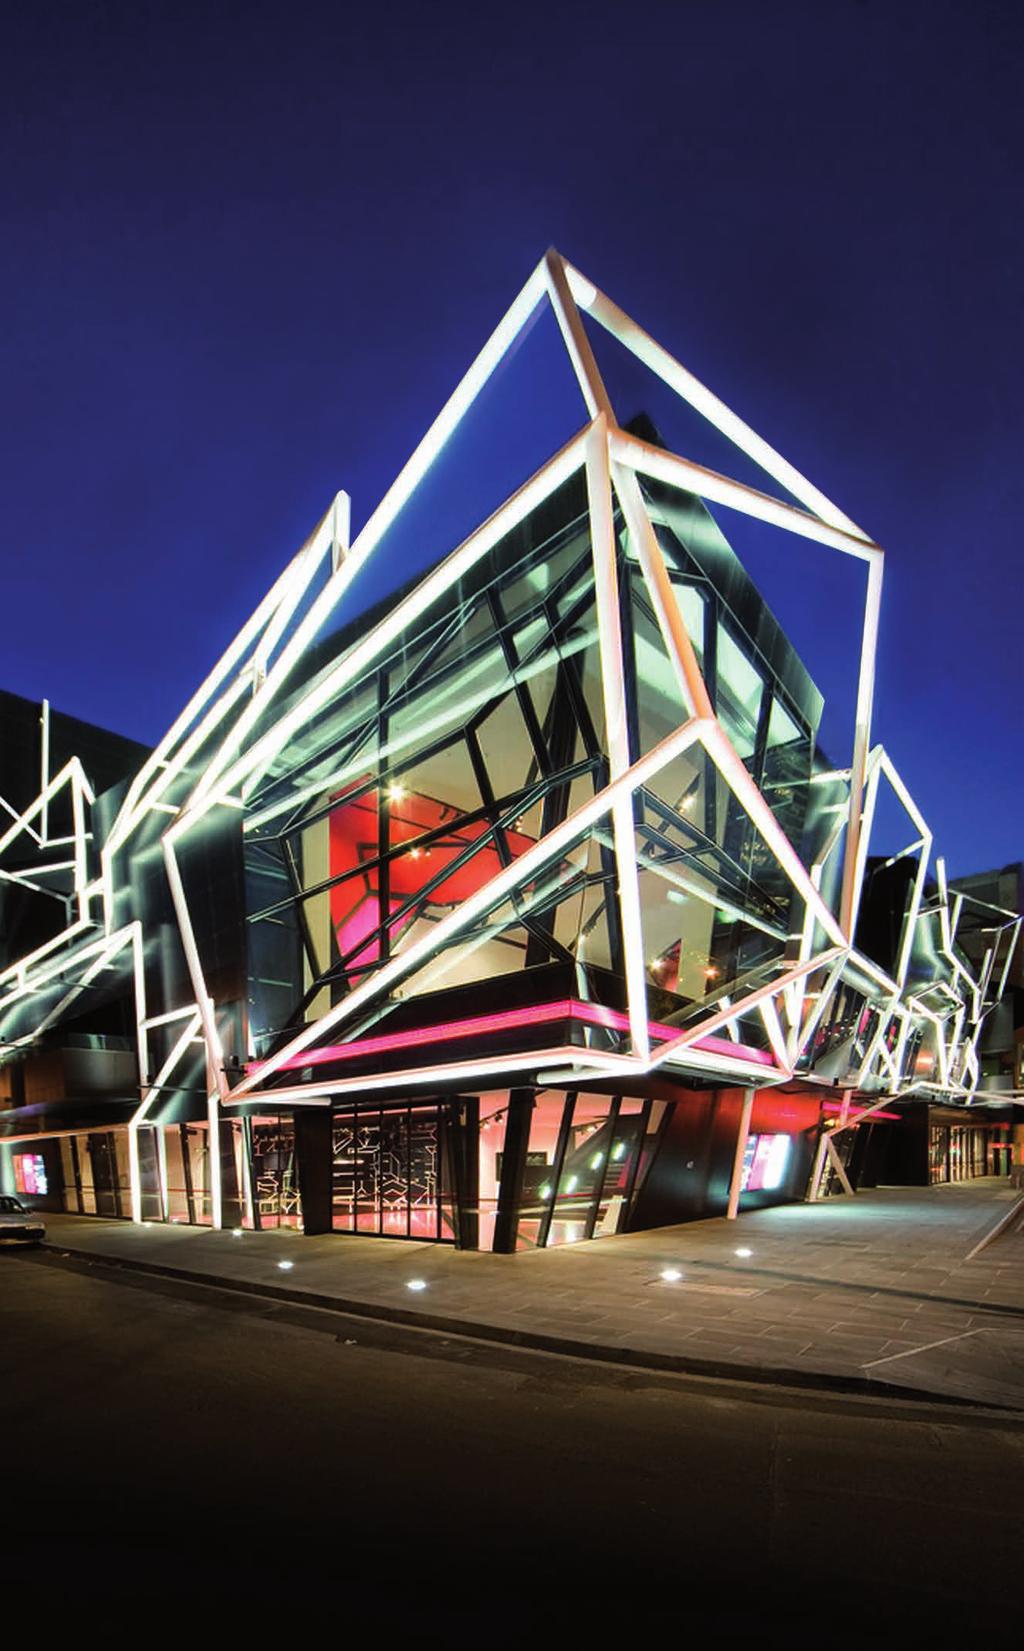 HOW MCB CAN ASSIST YOU INTERNATIONAL AND NATIONAL ASSOCIATION CONFERENCES As a knowledge city, Melbourne has much to offer associations and other groups looking for a destination to hold their next